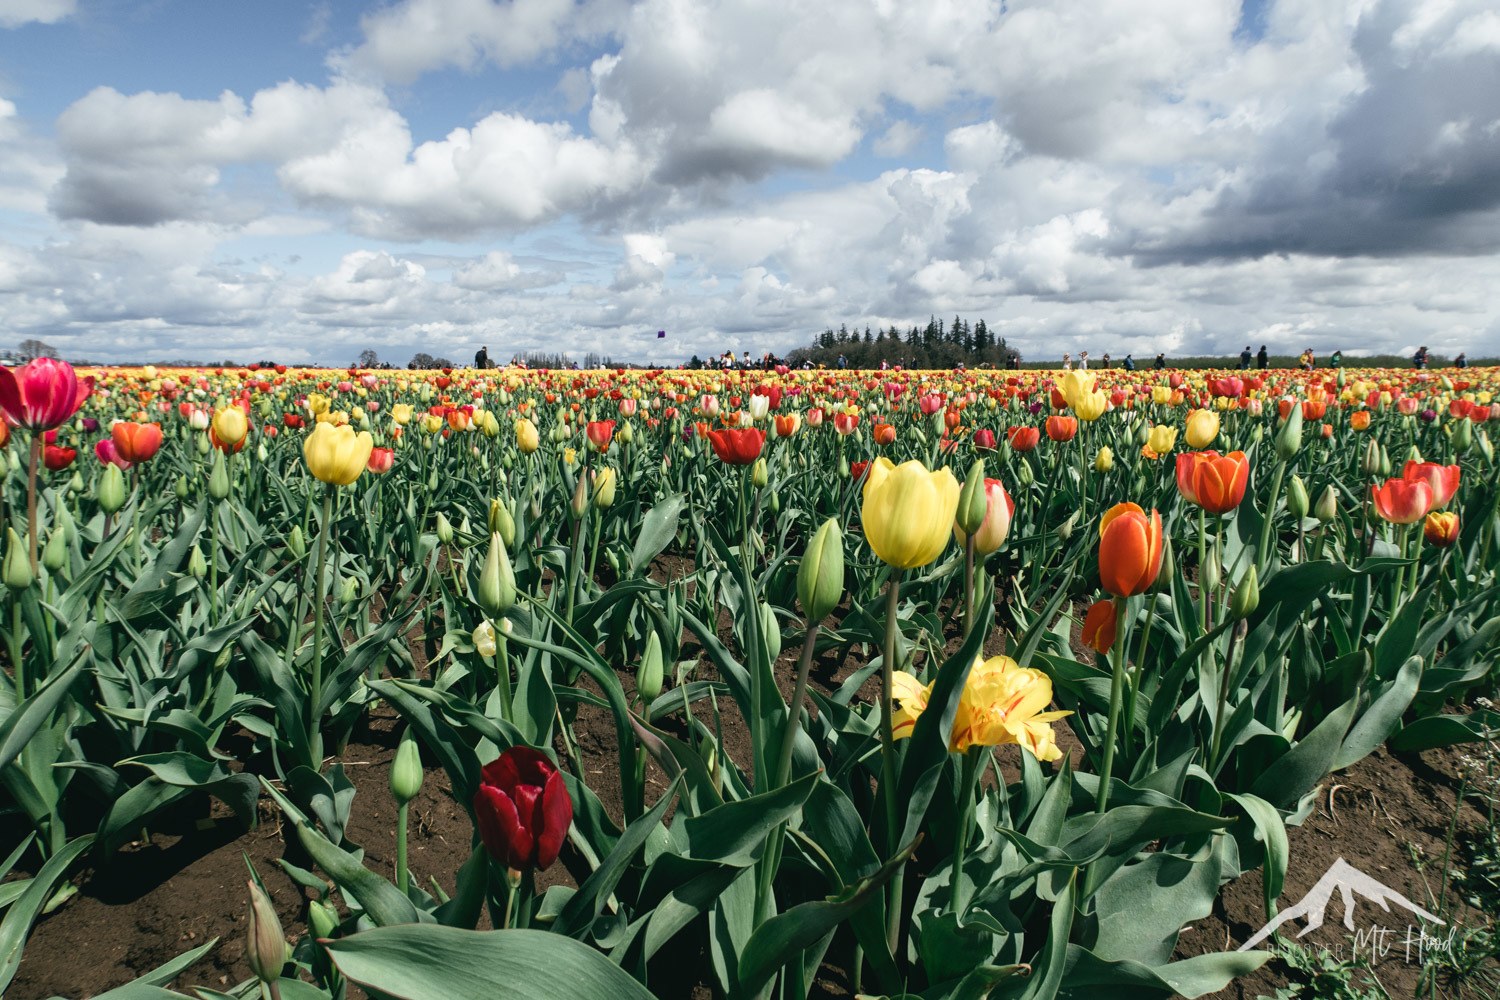 Several types of tulips in front of cloudy sky